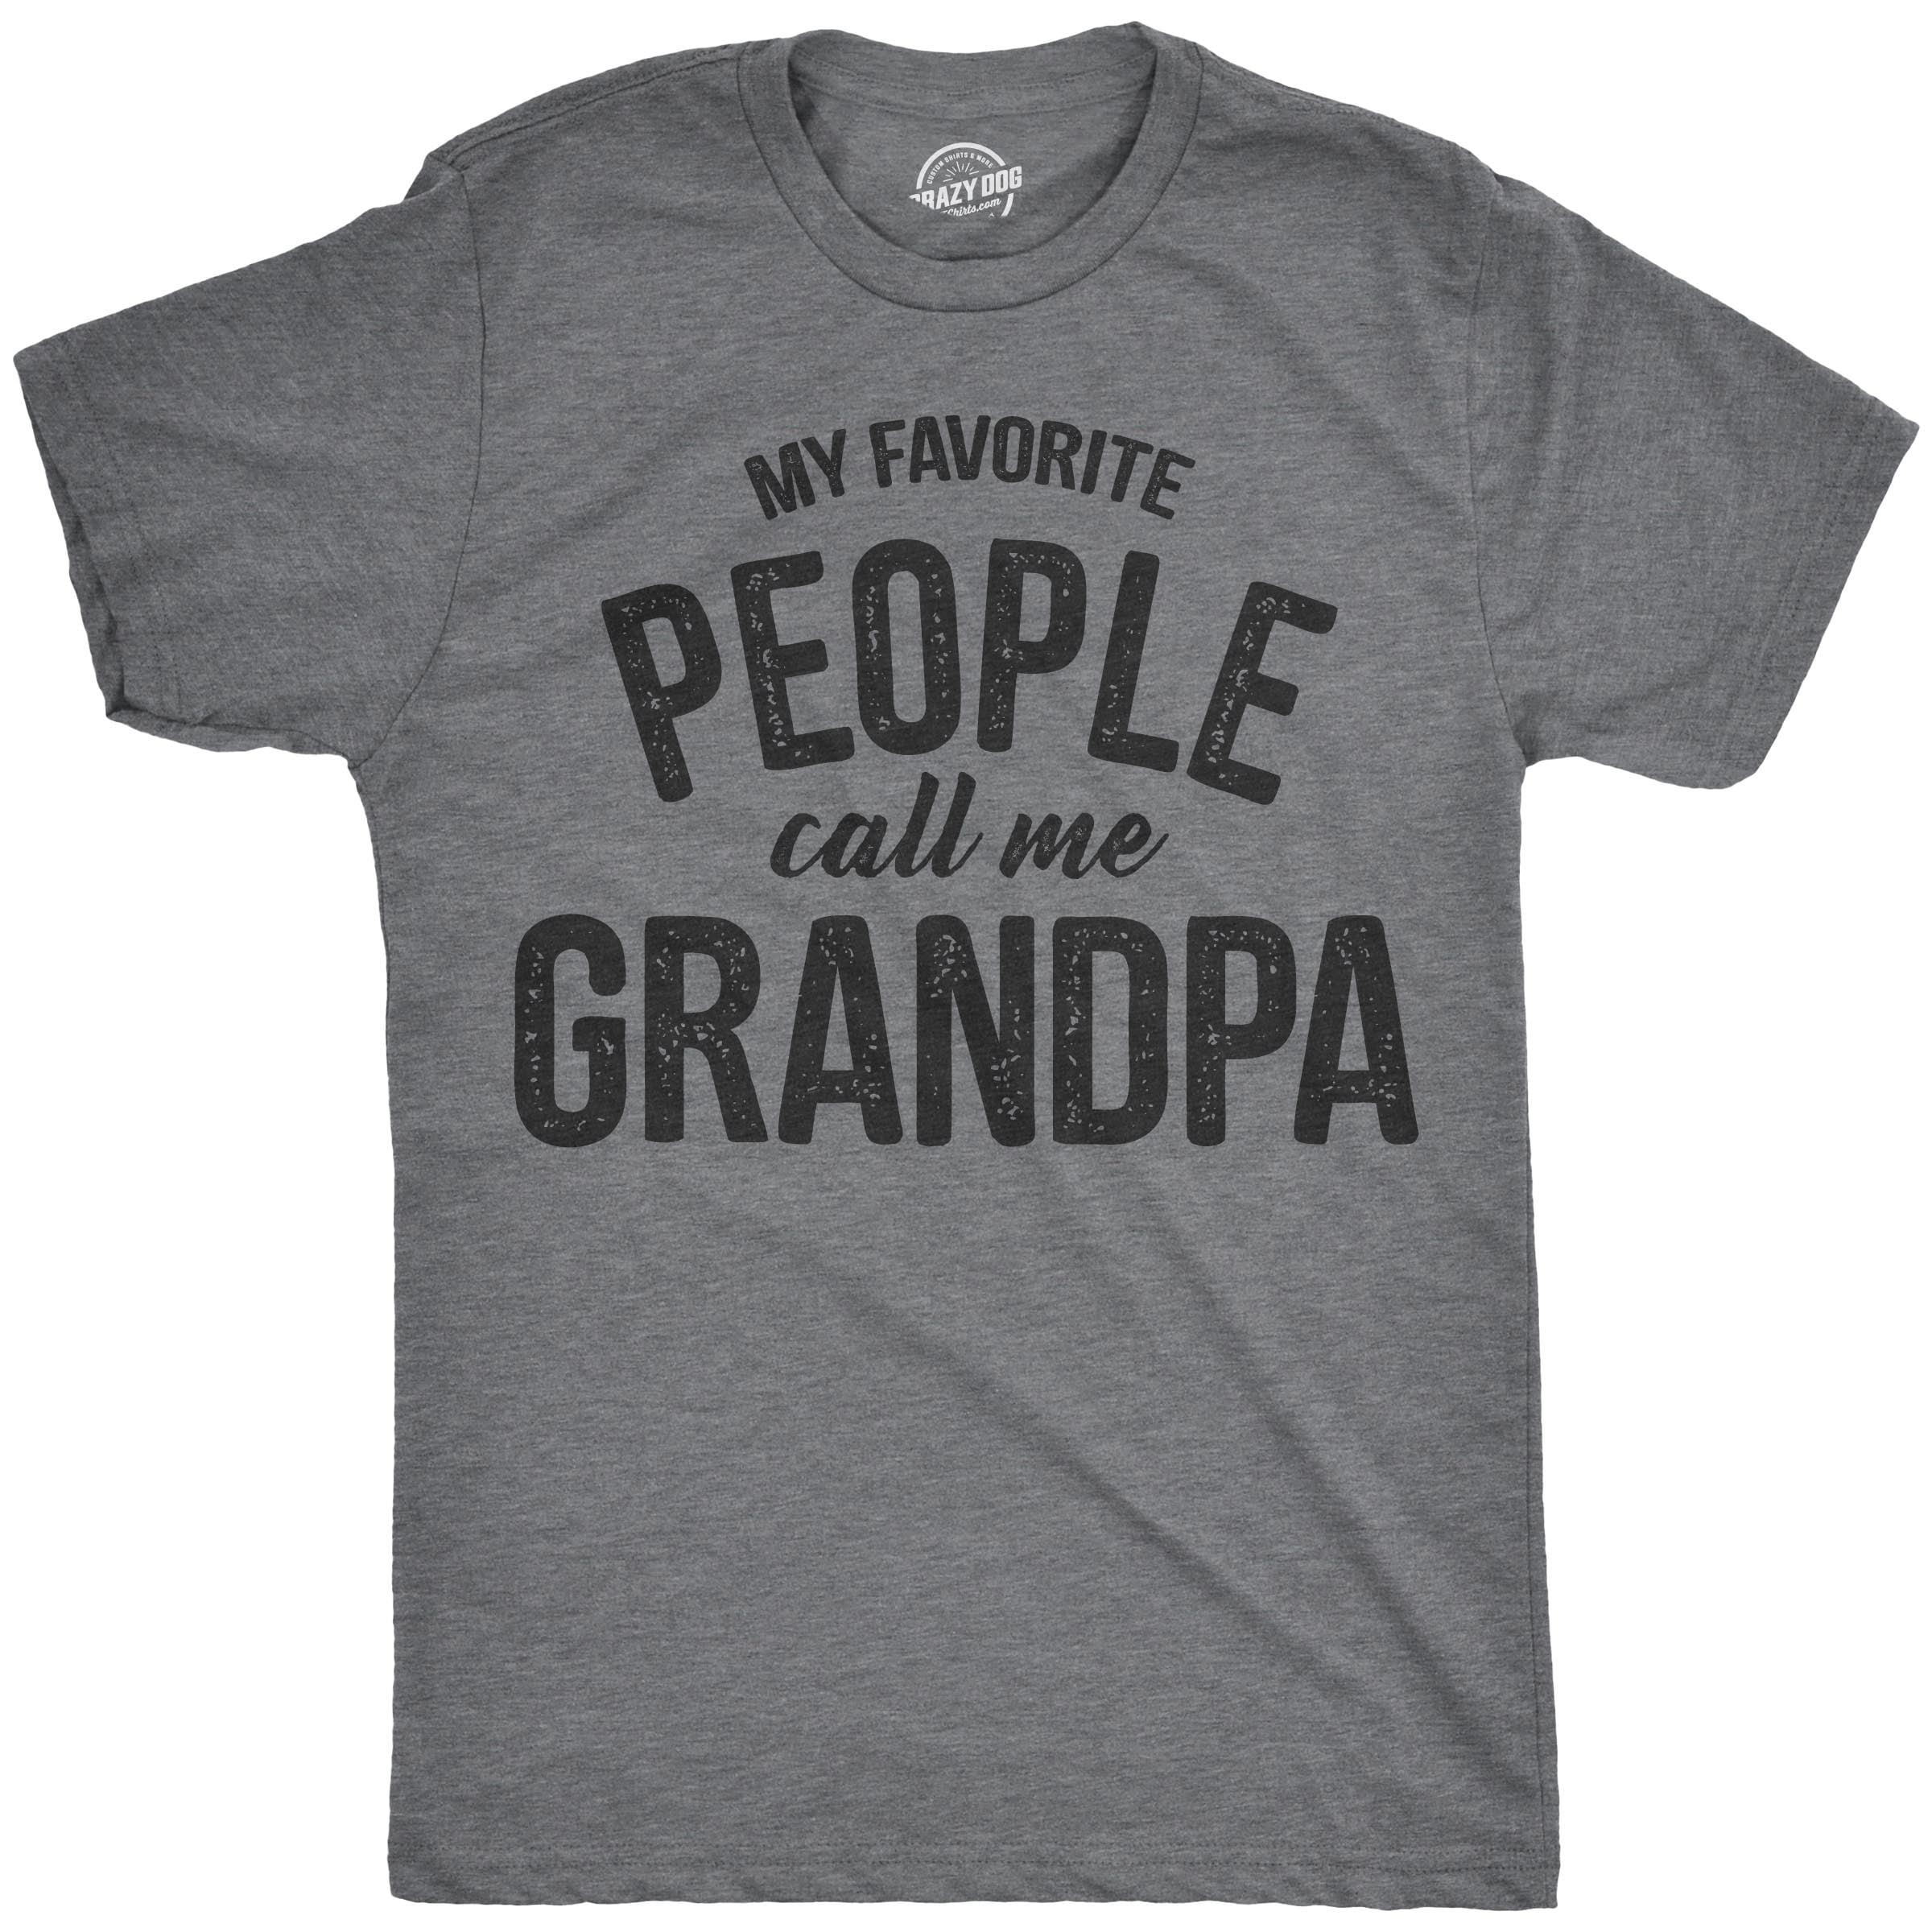 Grandpa Fathers Day Shirt  Father Day Gift for Grandpa  Funny Grandpa T-shirt  New Grandpa Fun Grandpa Humor  Grandfather Tee